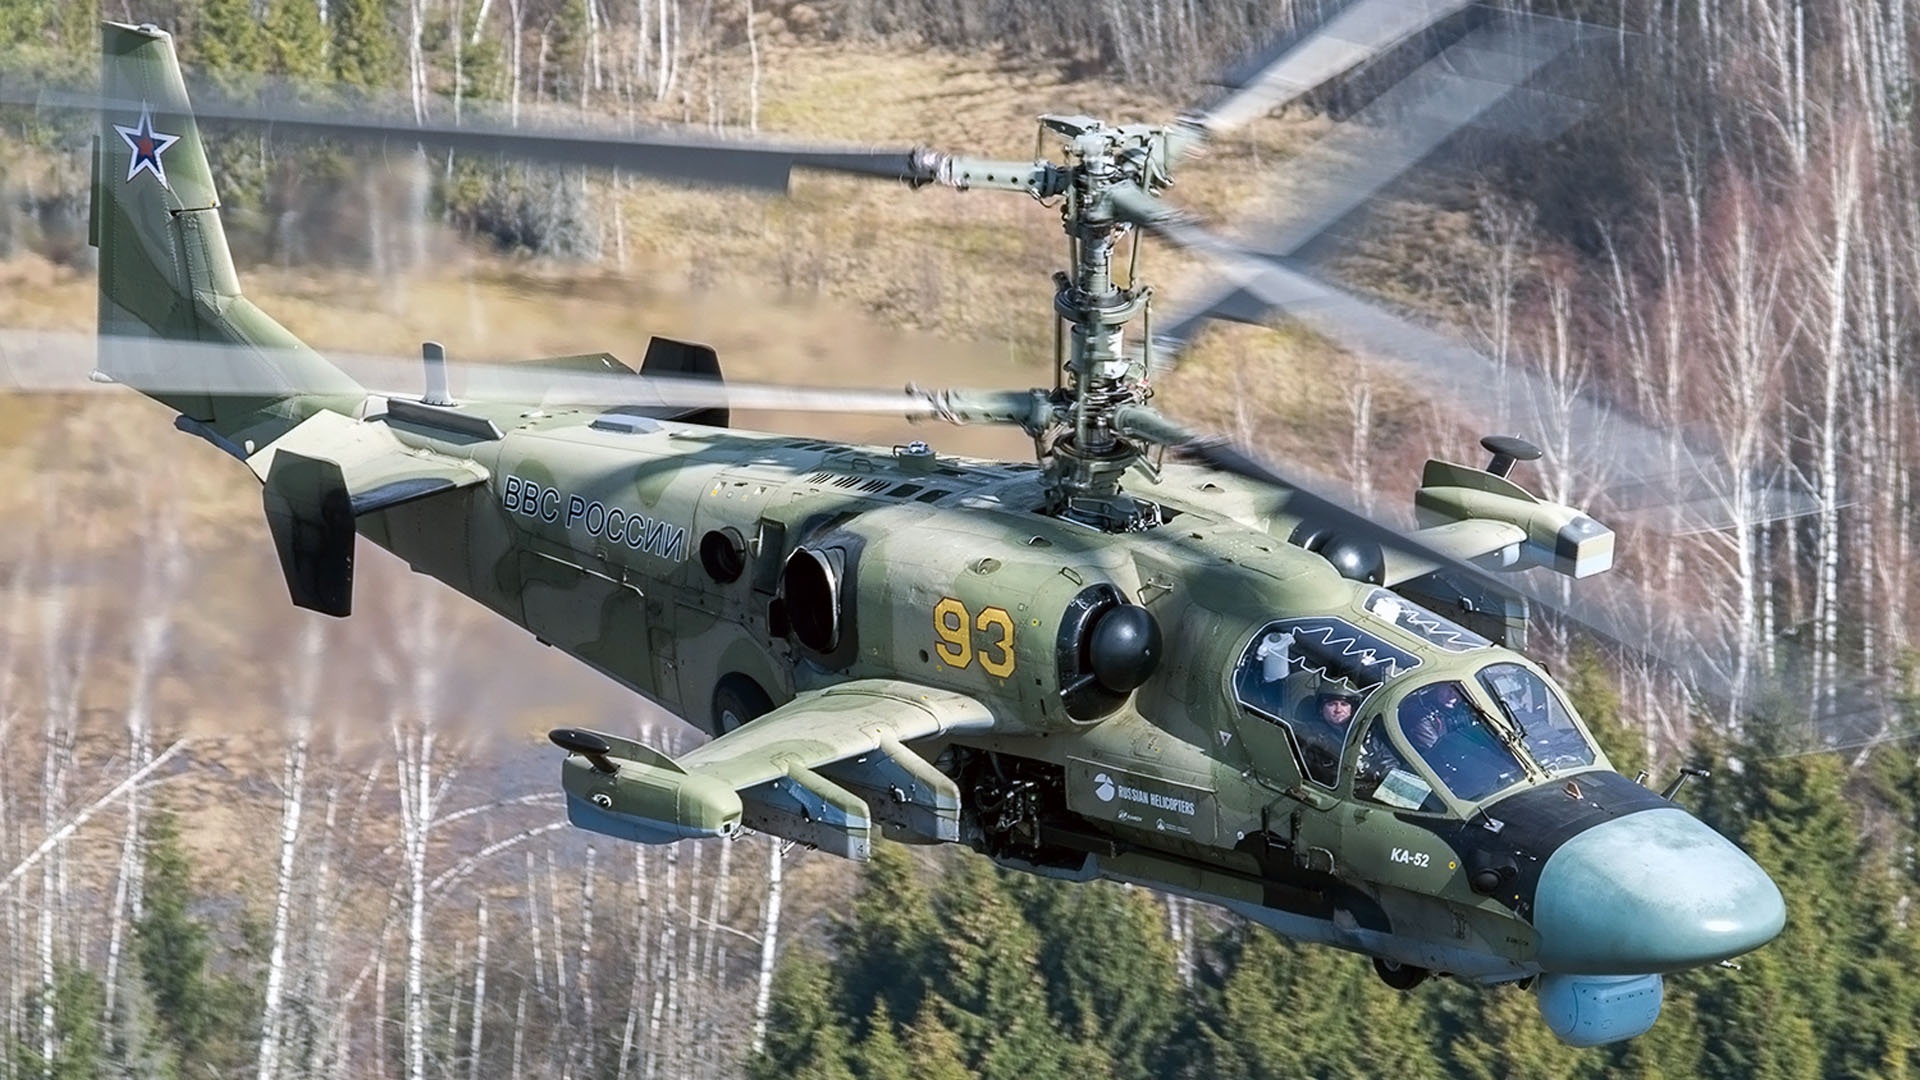 General 1920x1080 military aircraft helicopters vehicle military aircraft high angle Kamov Ka-52 Russian Air Force